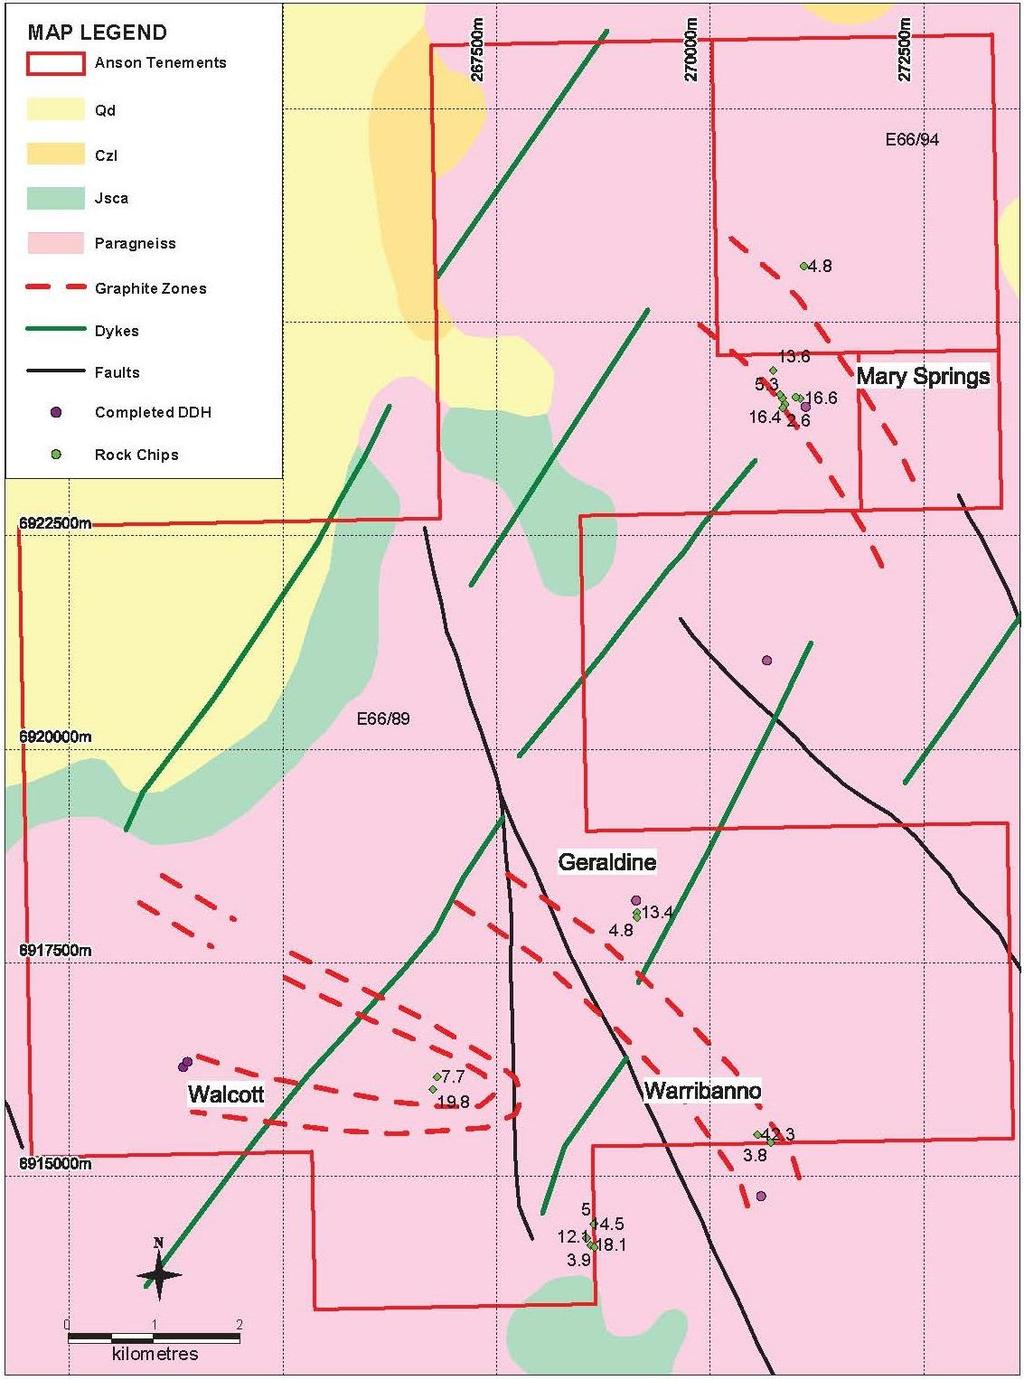 About the Ajana Graphite Project Located in Western Australia, a proven and established mining province with a stable political environment, the Ajana graphite project is adjacent to the North West